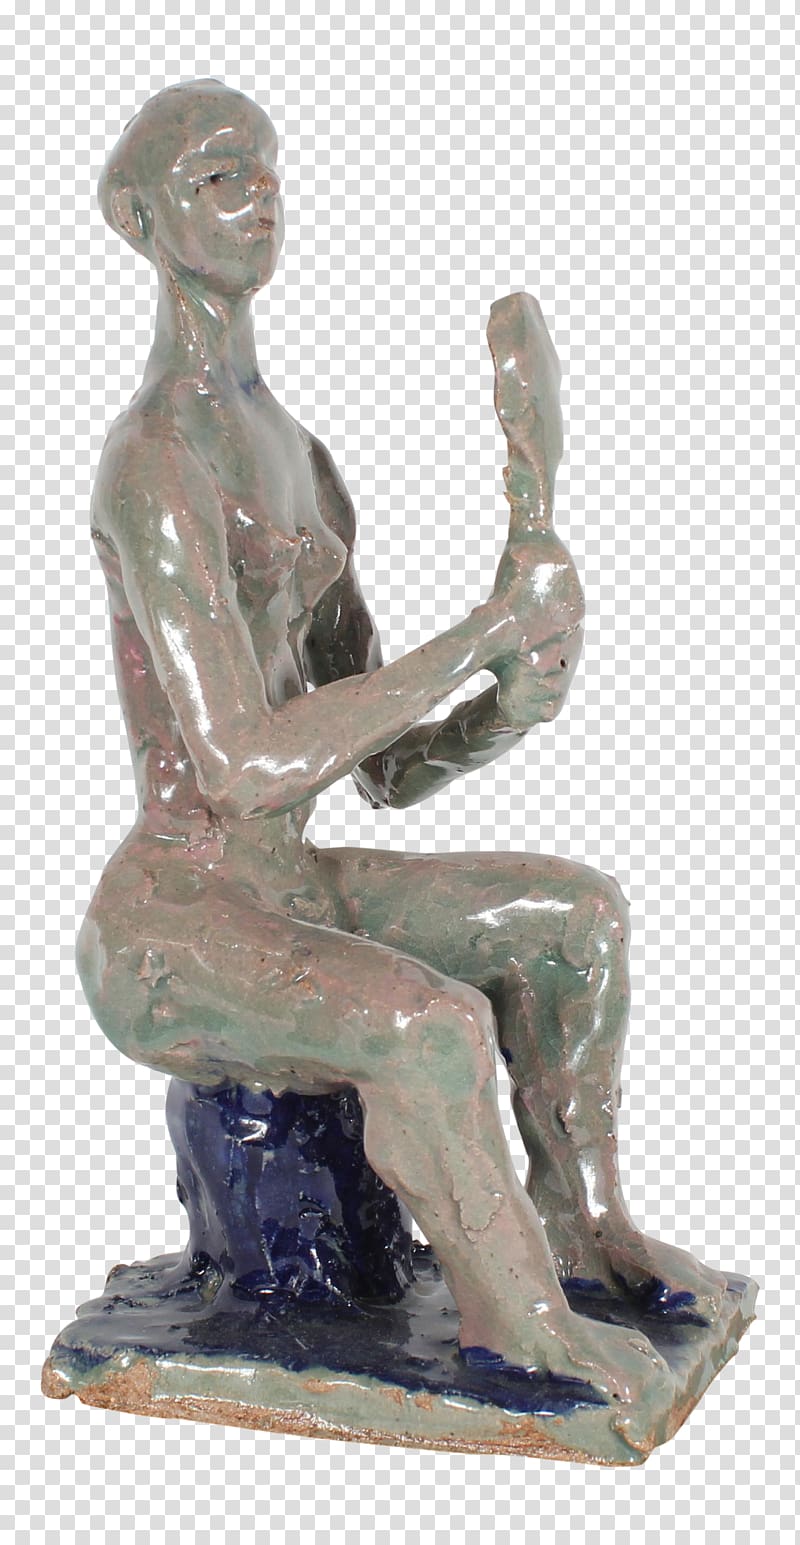 Bronze sculpture Stone carving Classical sculpture, others transparent background PNG clipart